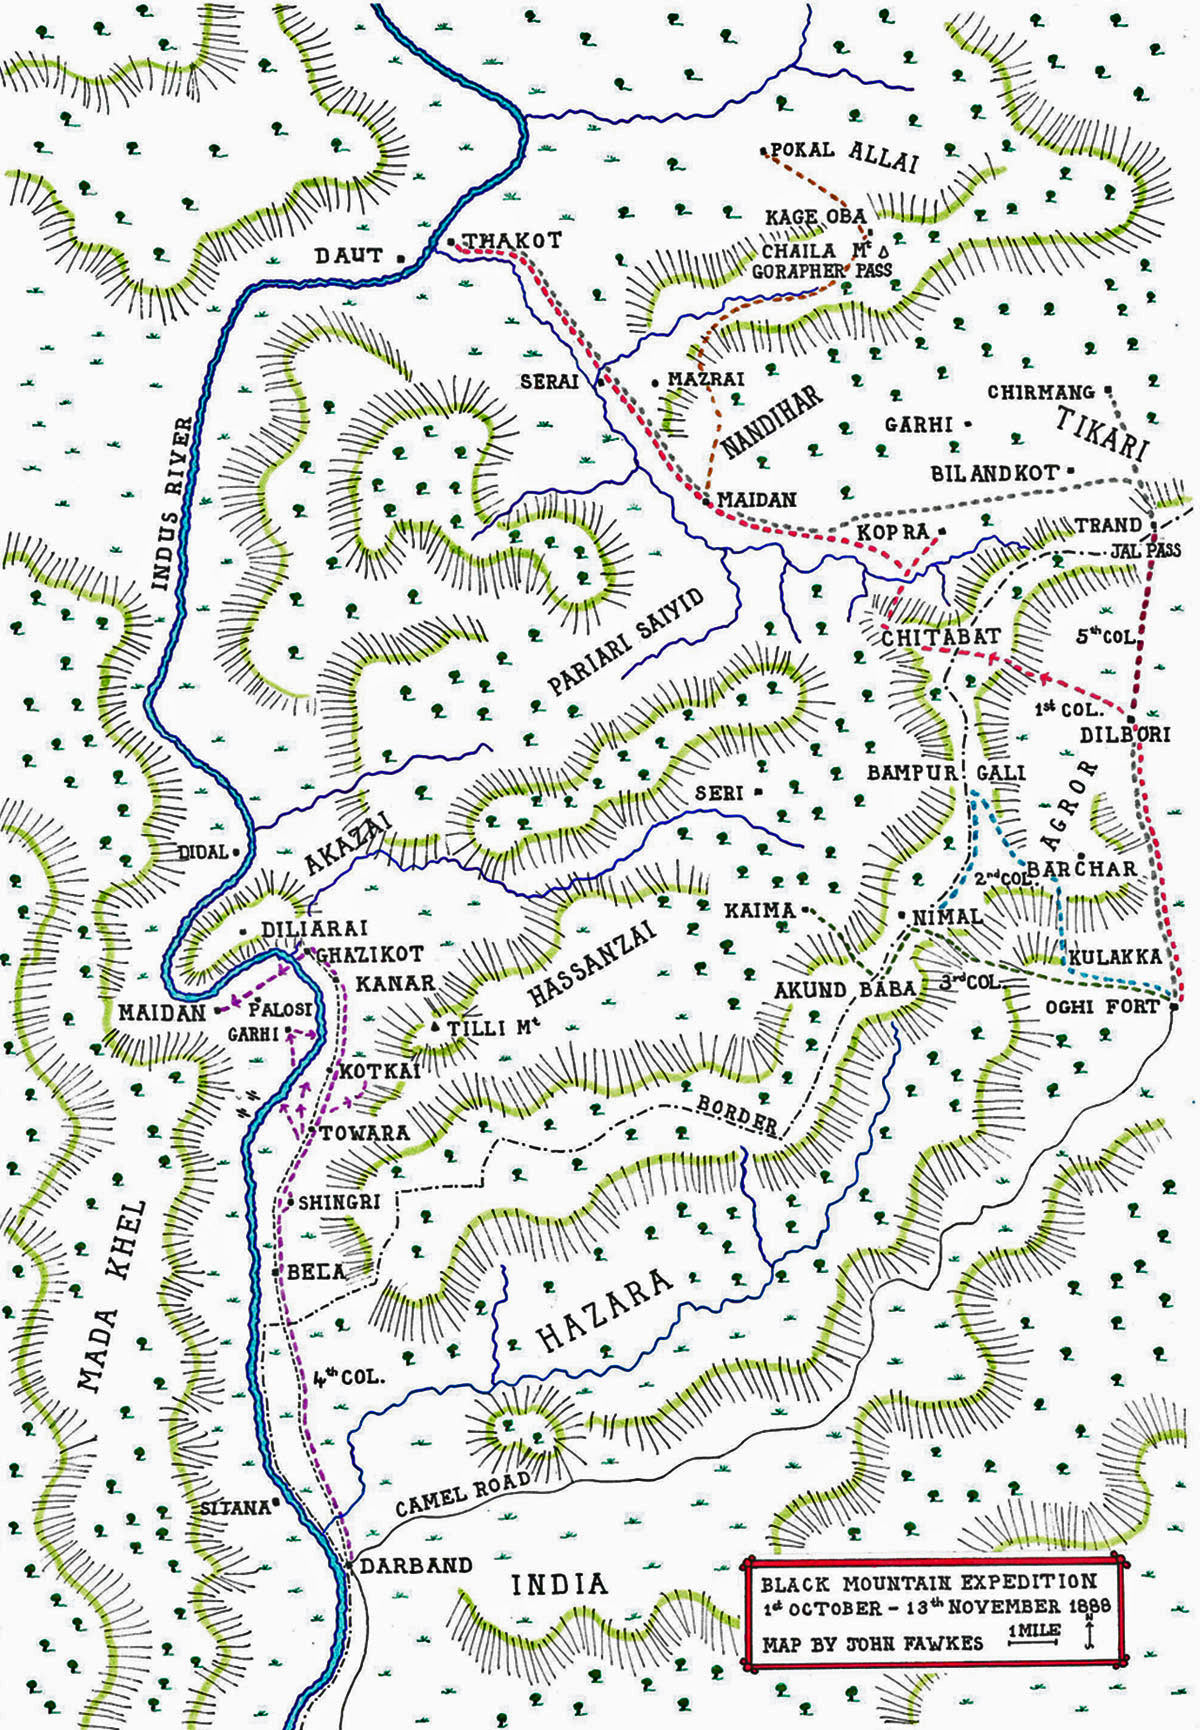 Map of the Black Mountain Expedition from 1st October 1888 to 13th November 1888 on the North-West Frontier of India: map by John Fawkes